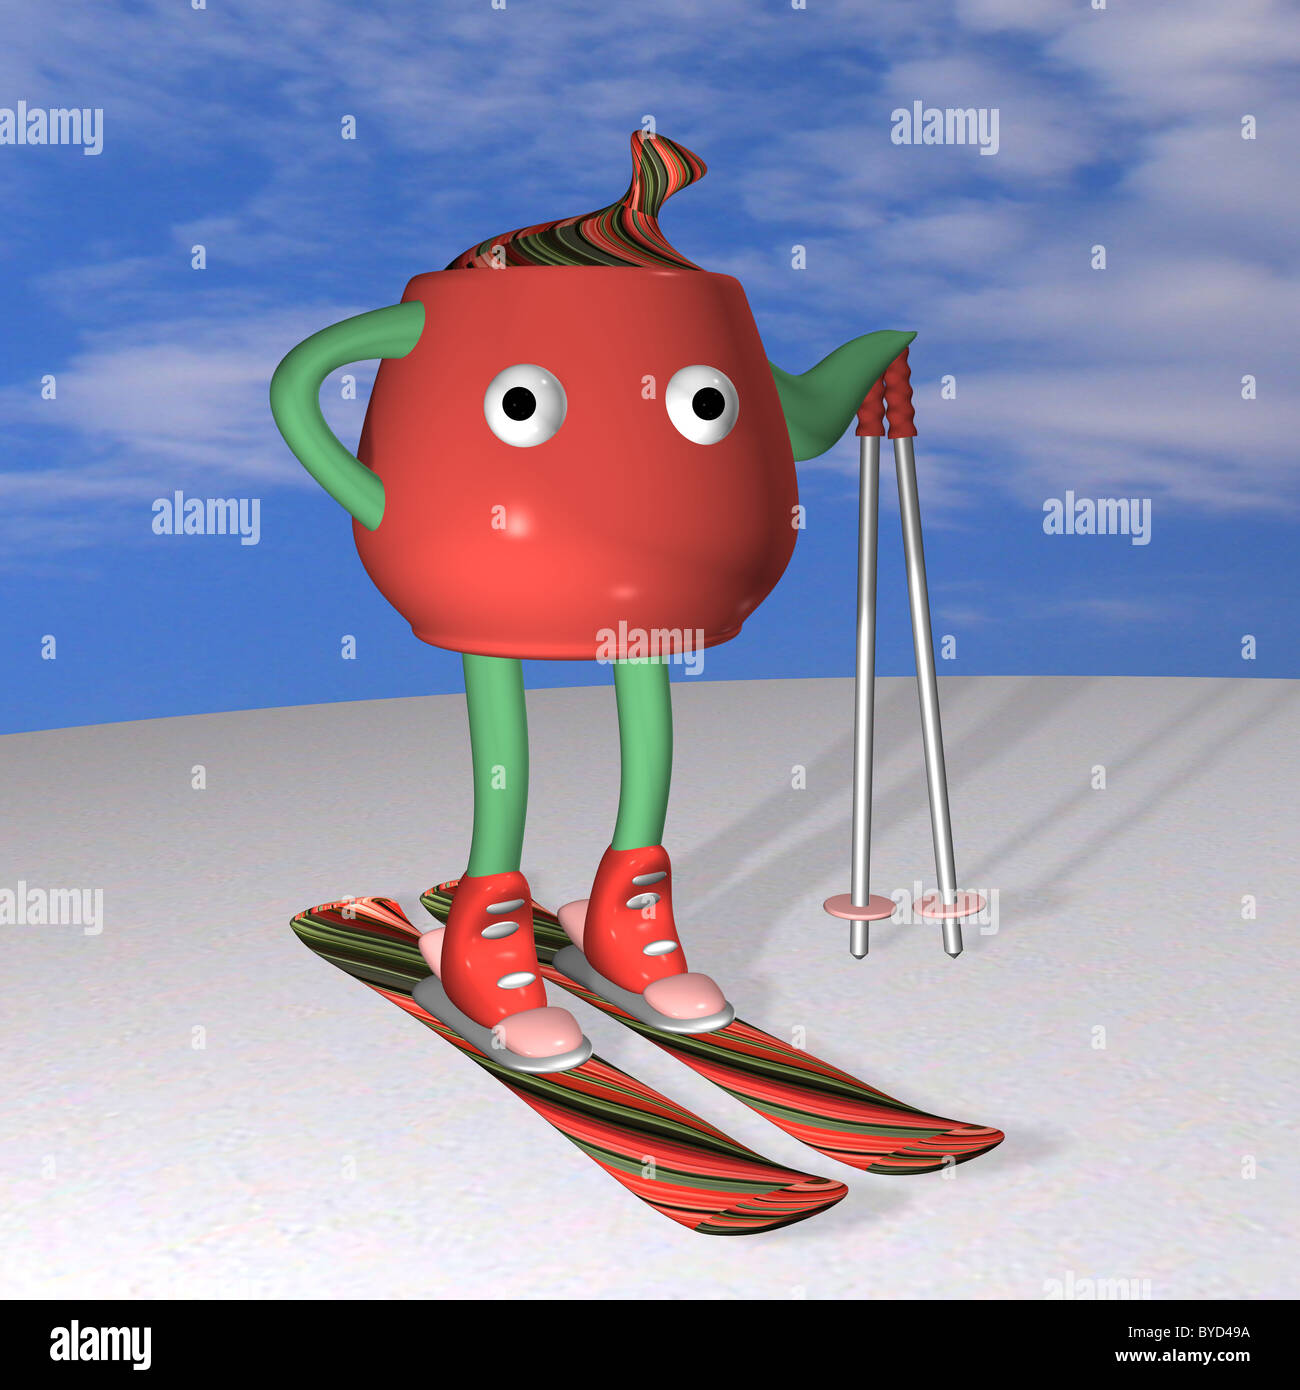 The teapot the mountain skier costs on mountain skiing and poses, on snow, against the sky, 3d. Stock Photo